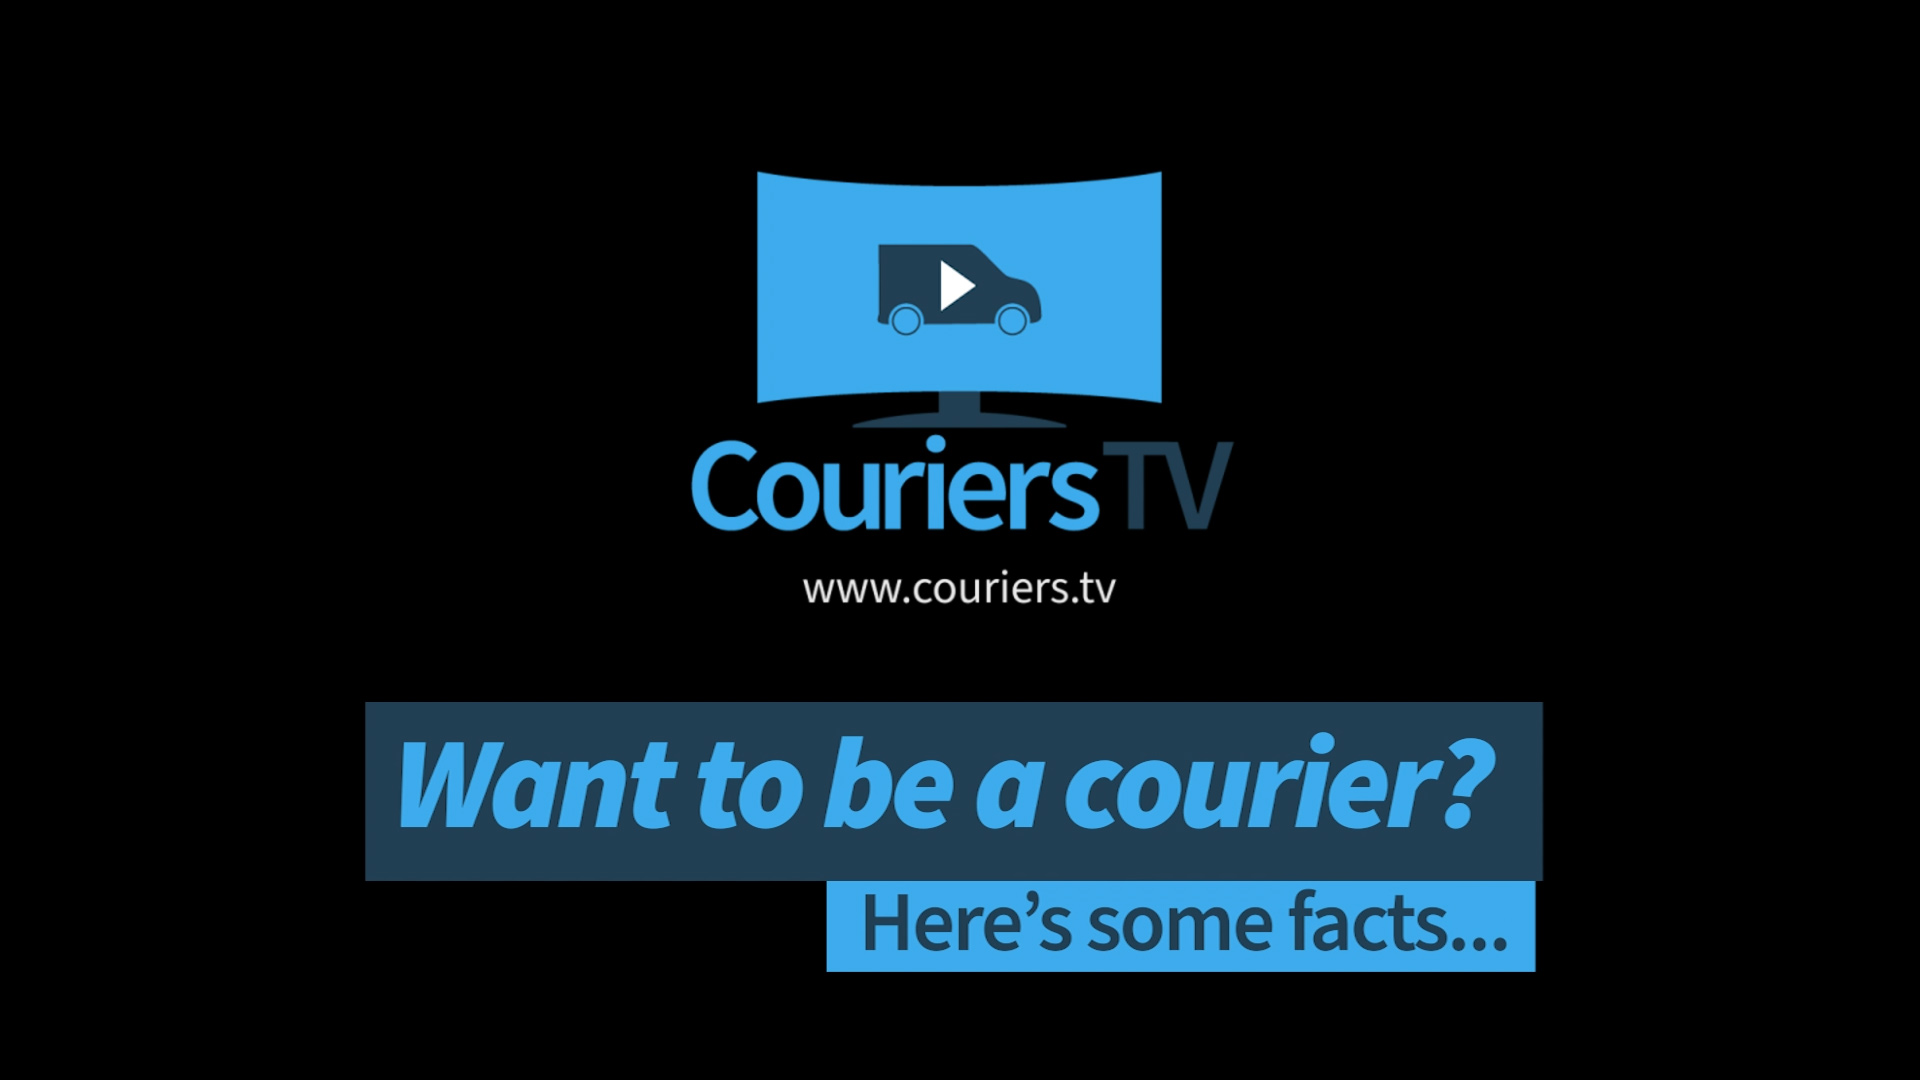 Courier Facts